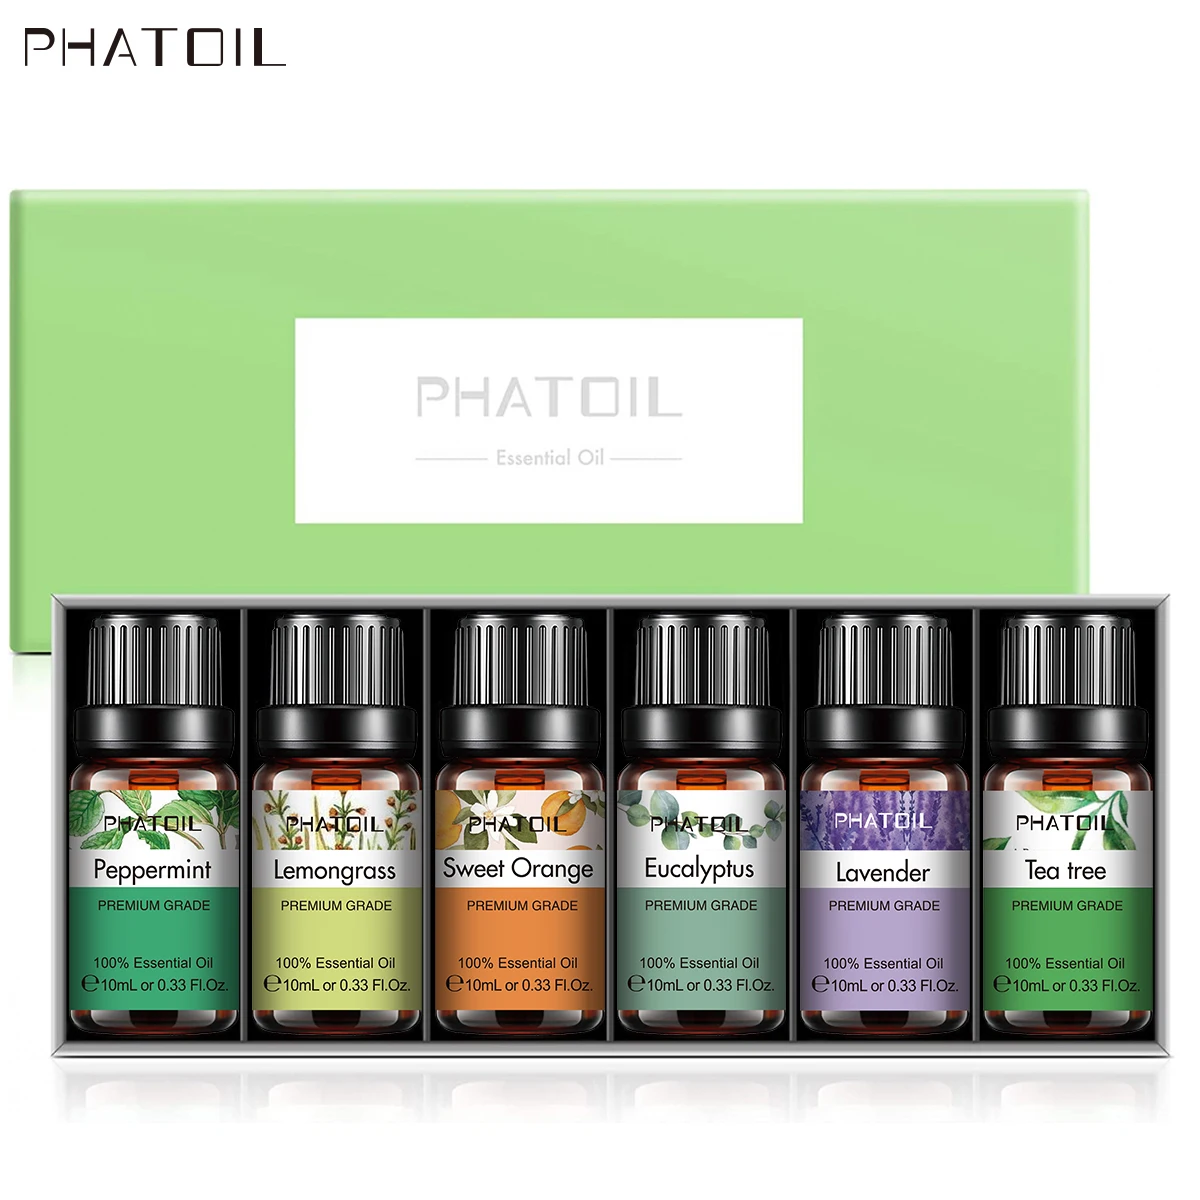 PHATOIL-6pcs-Gift-Box-Pure-Plant-Essential-Oils-Set-for-Humidifier ...